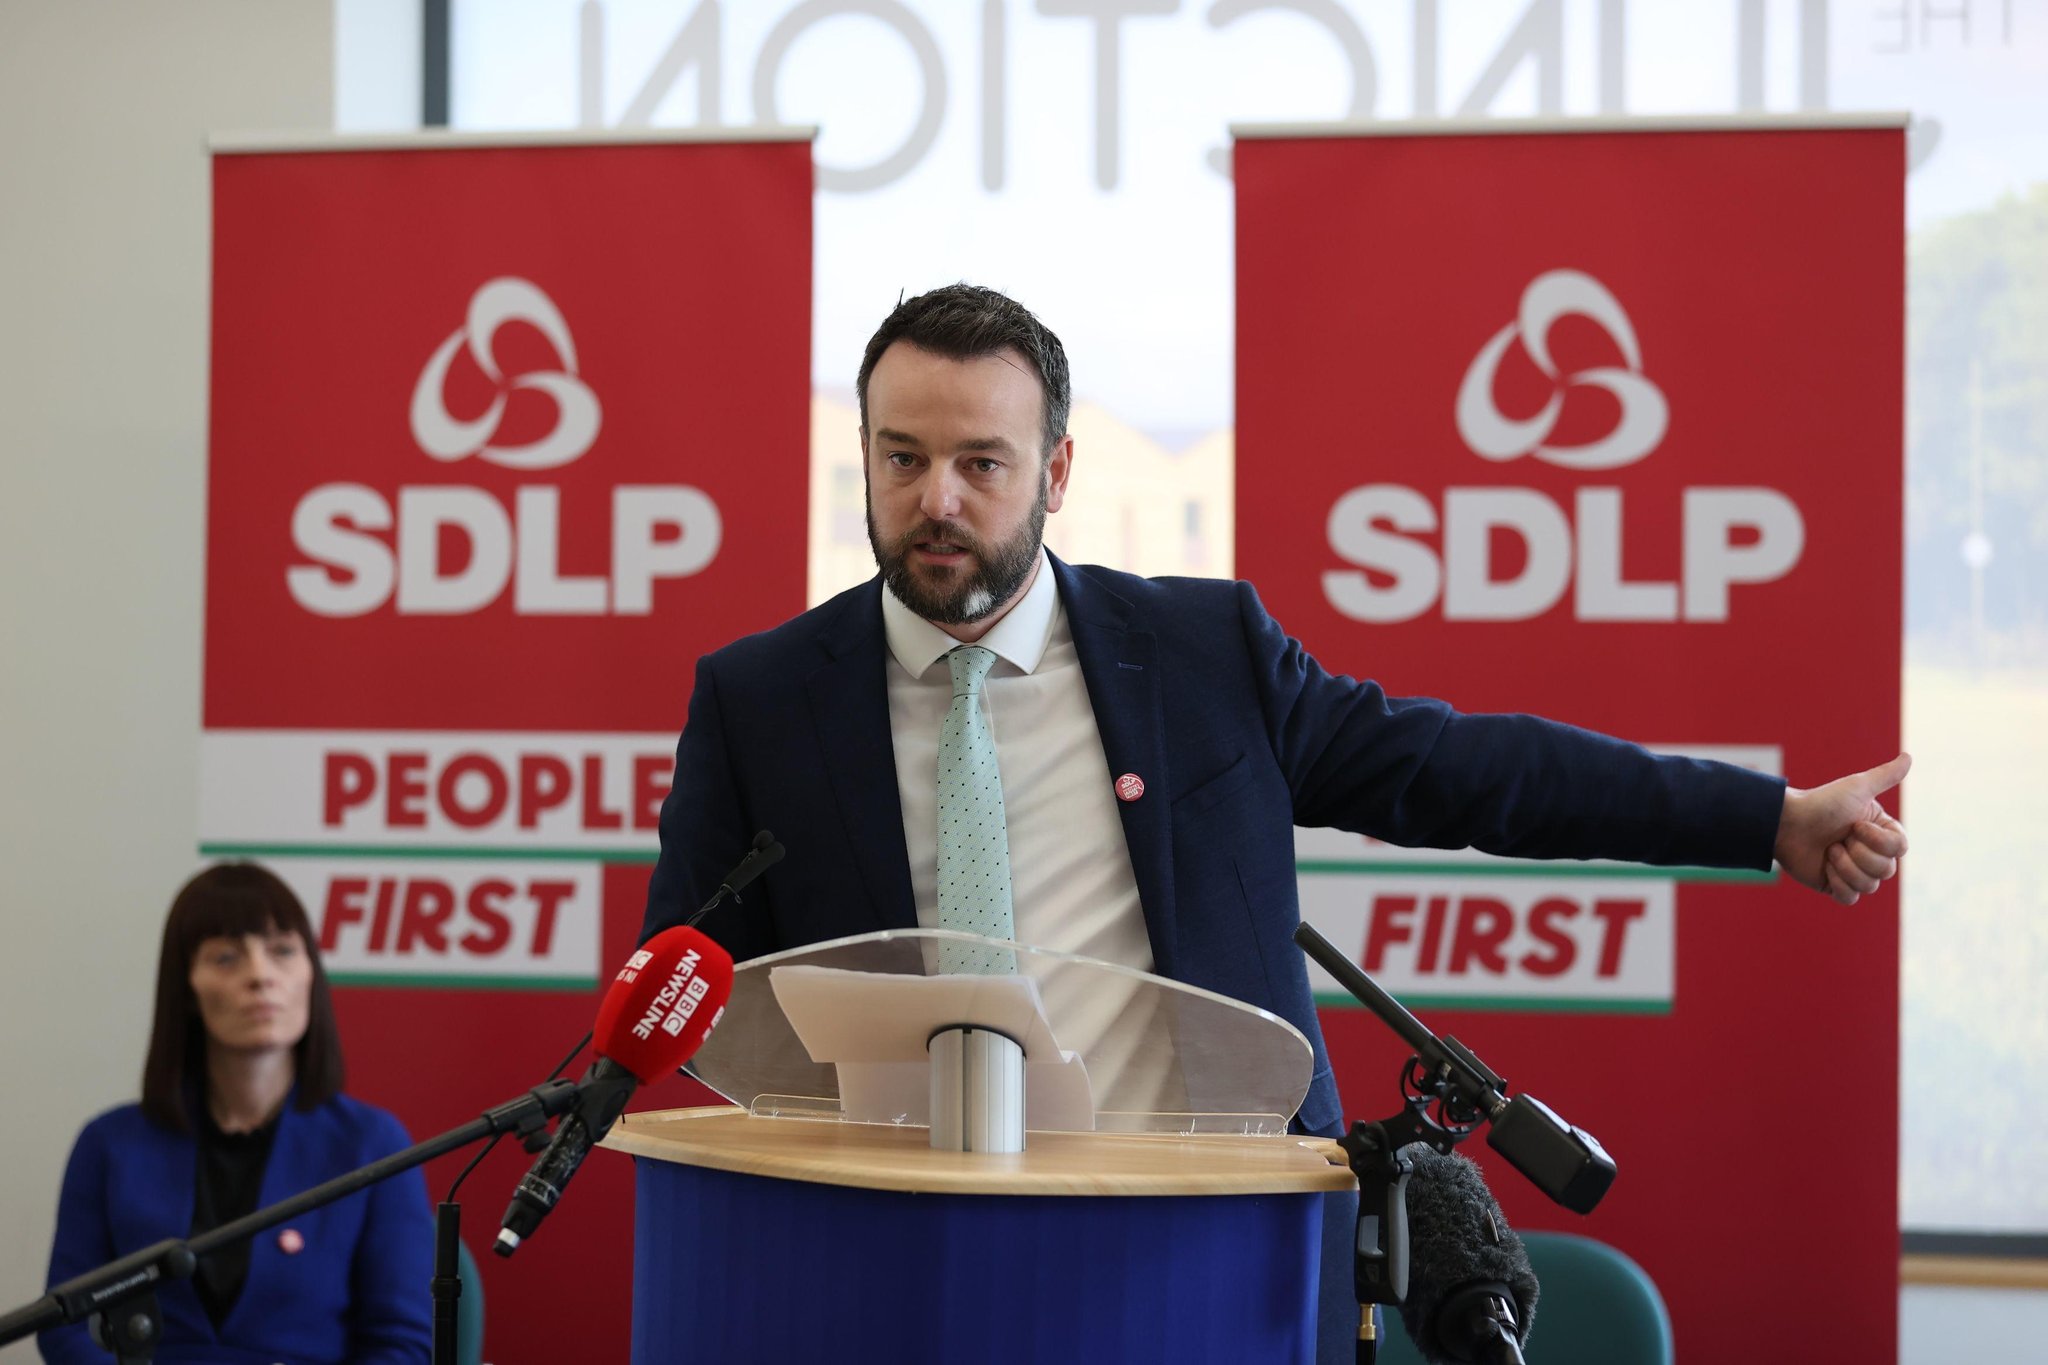 'Scandal' of poverty in NI should be top election priority, says SDLP leader